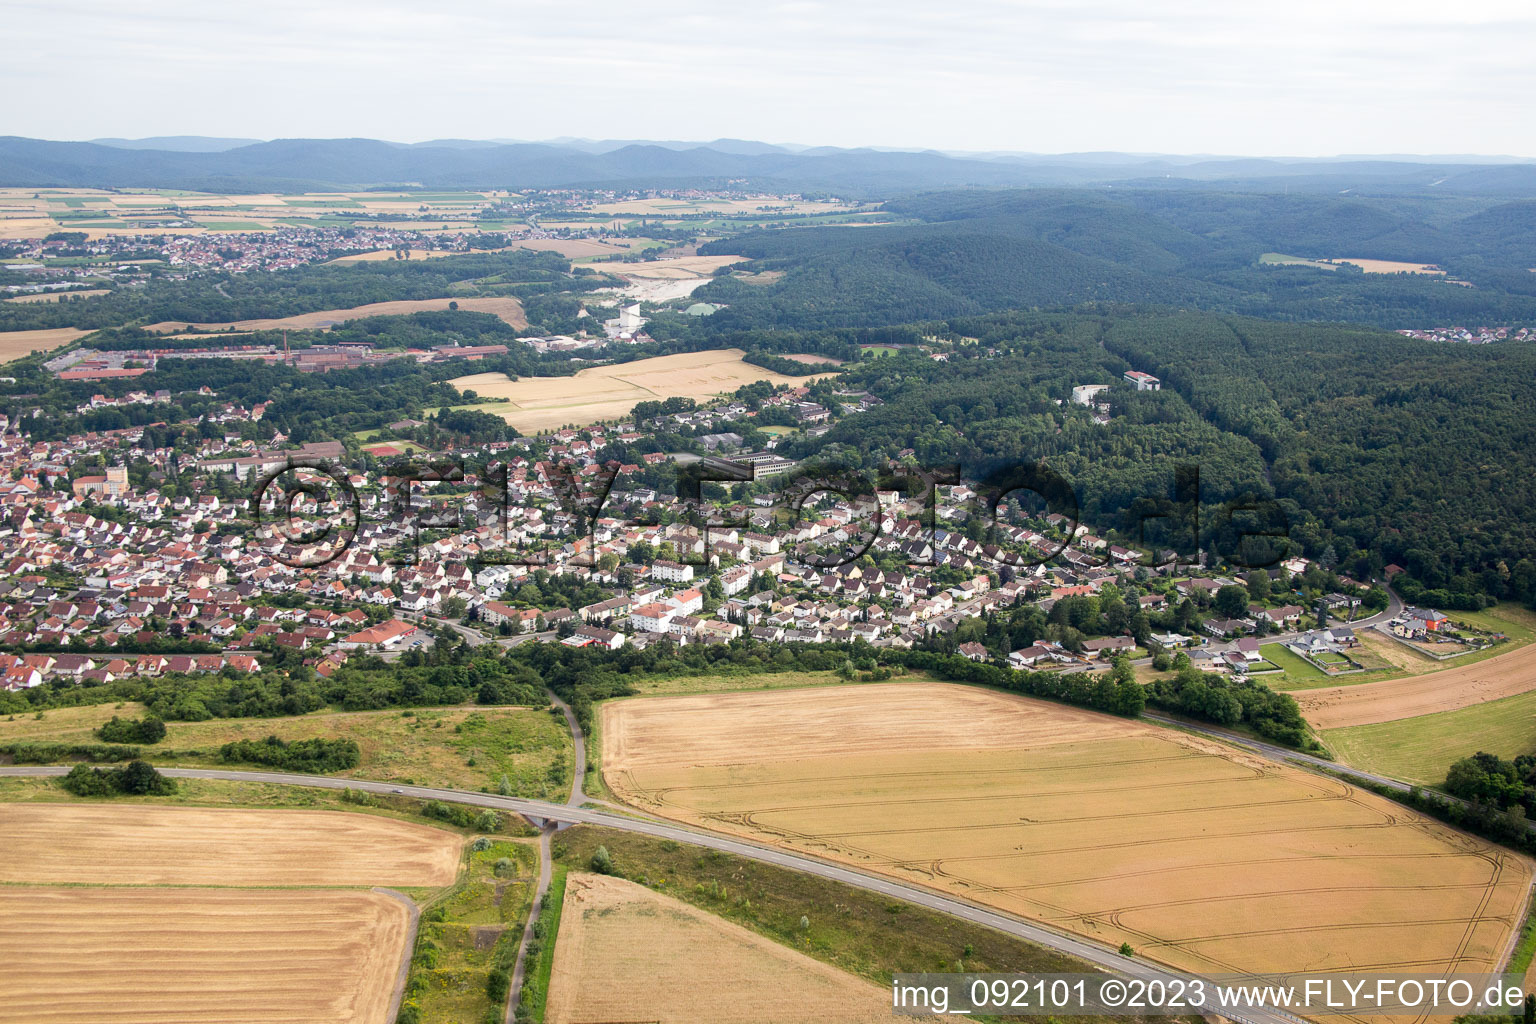 Aerial photograpy of Eisenberg in the state Rhineland-Palatinate, Germany